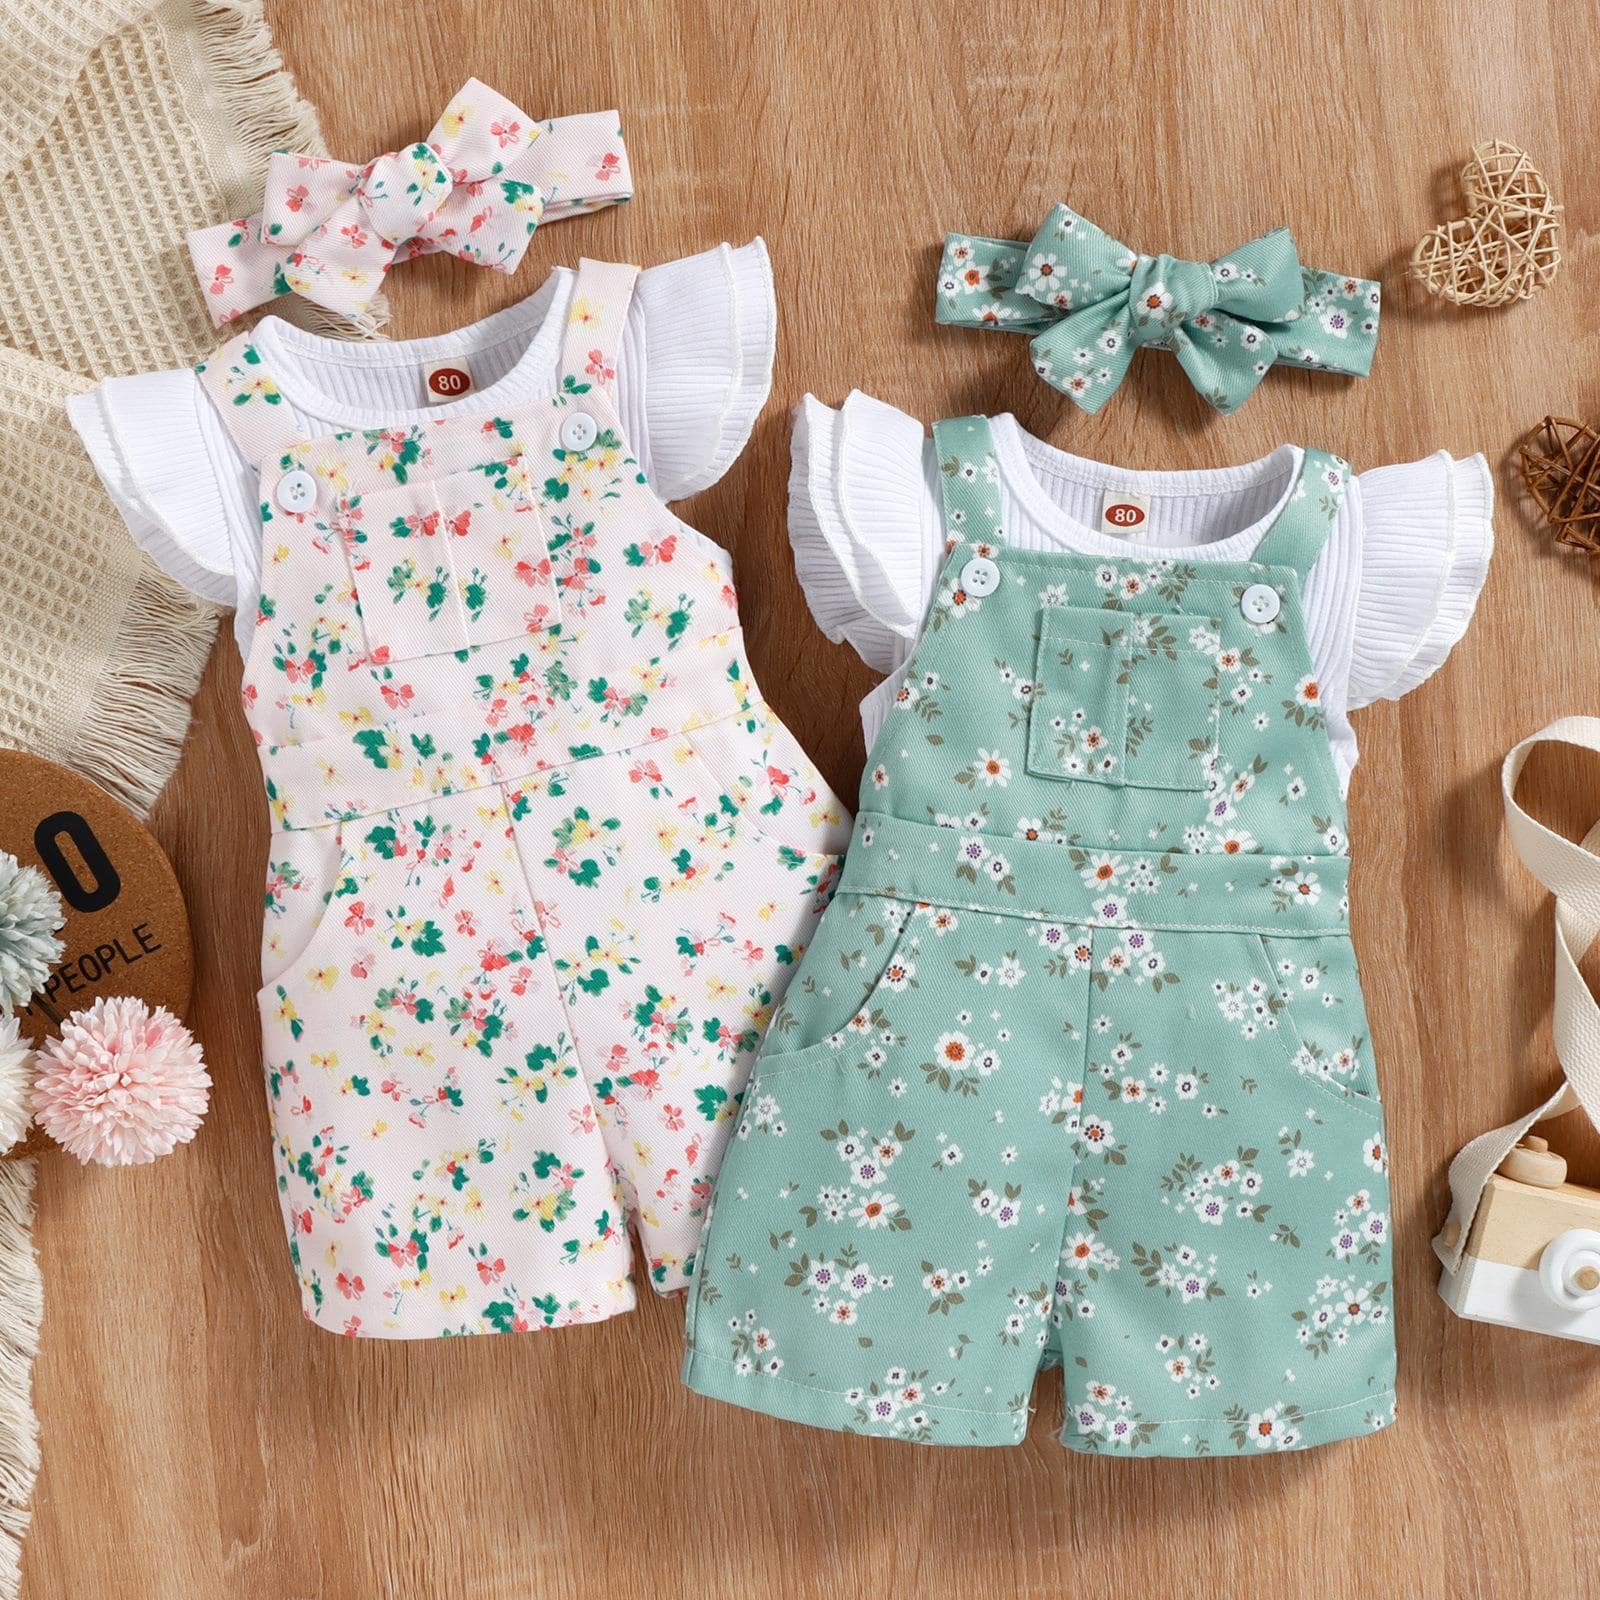 Cute cotton sleeveless t-shirt, Floral Suspender Pants and Headband